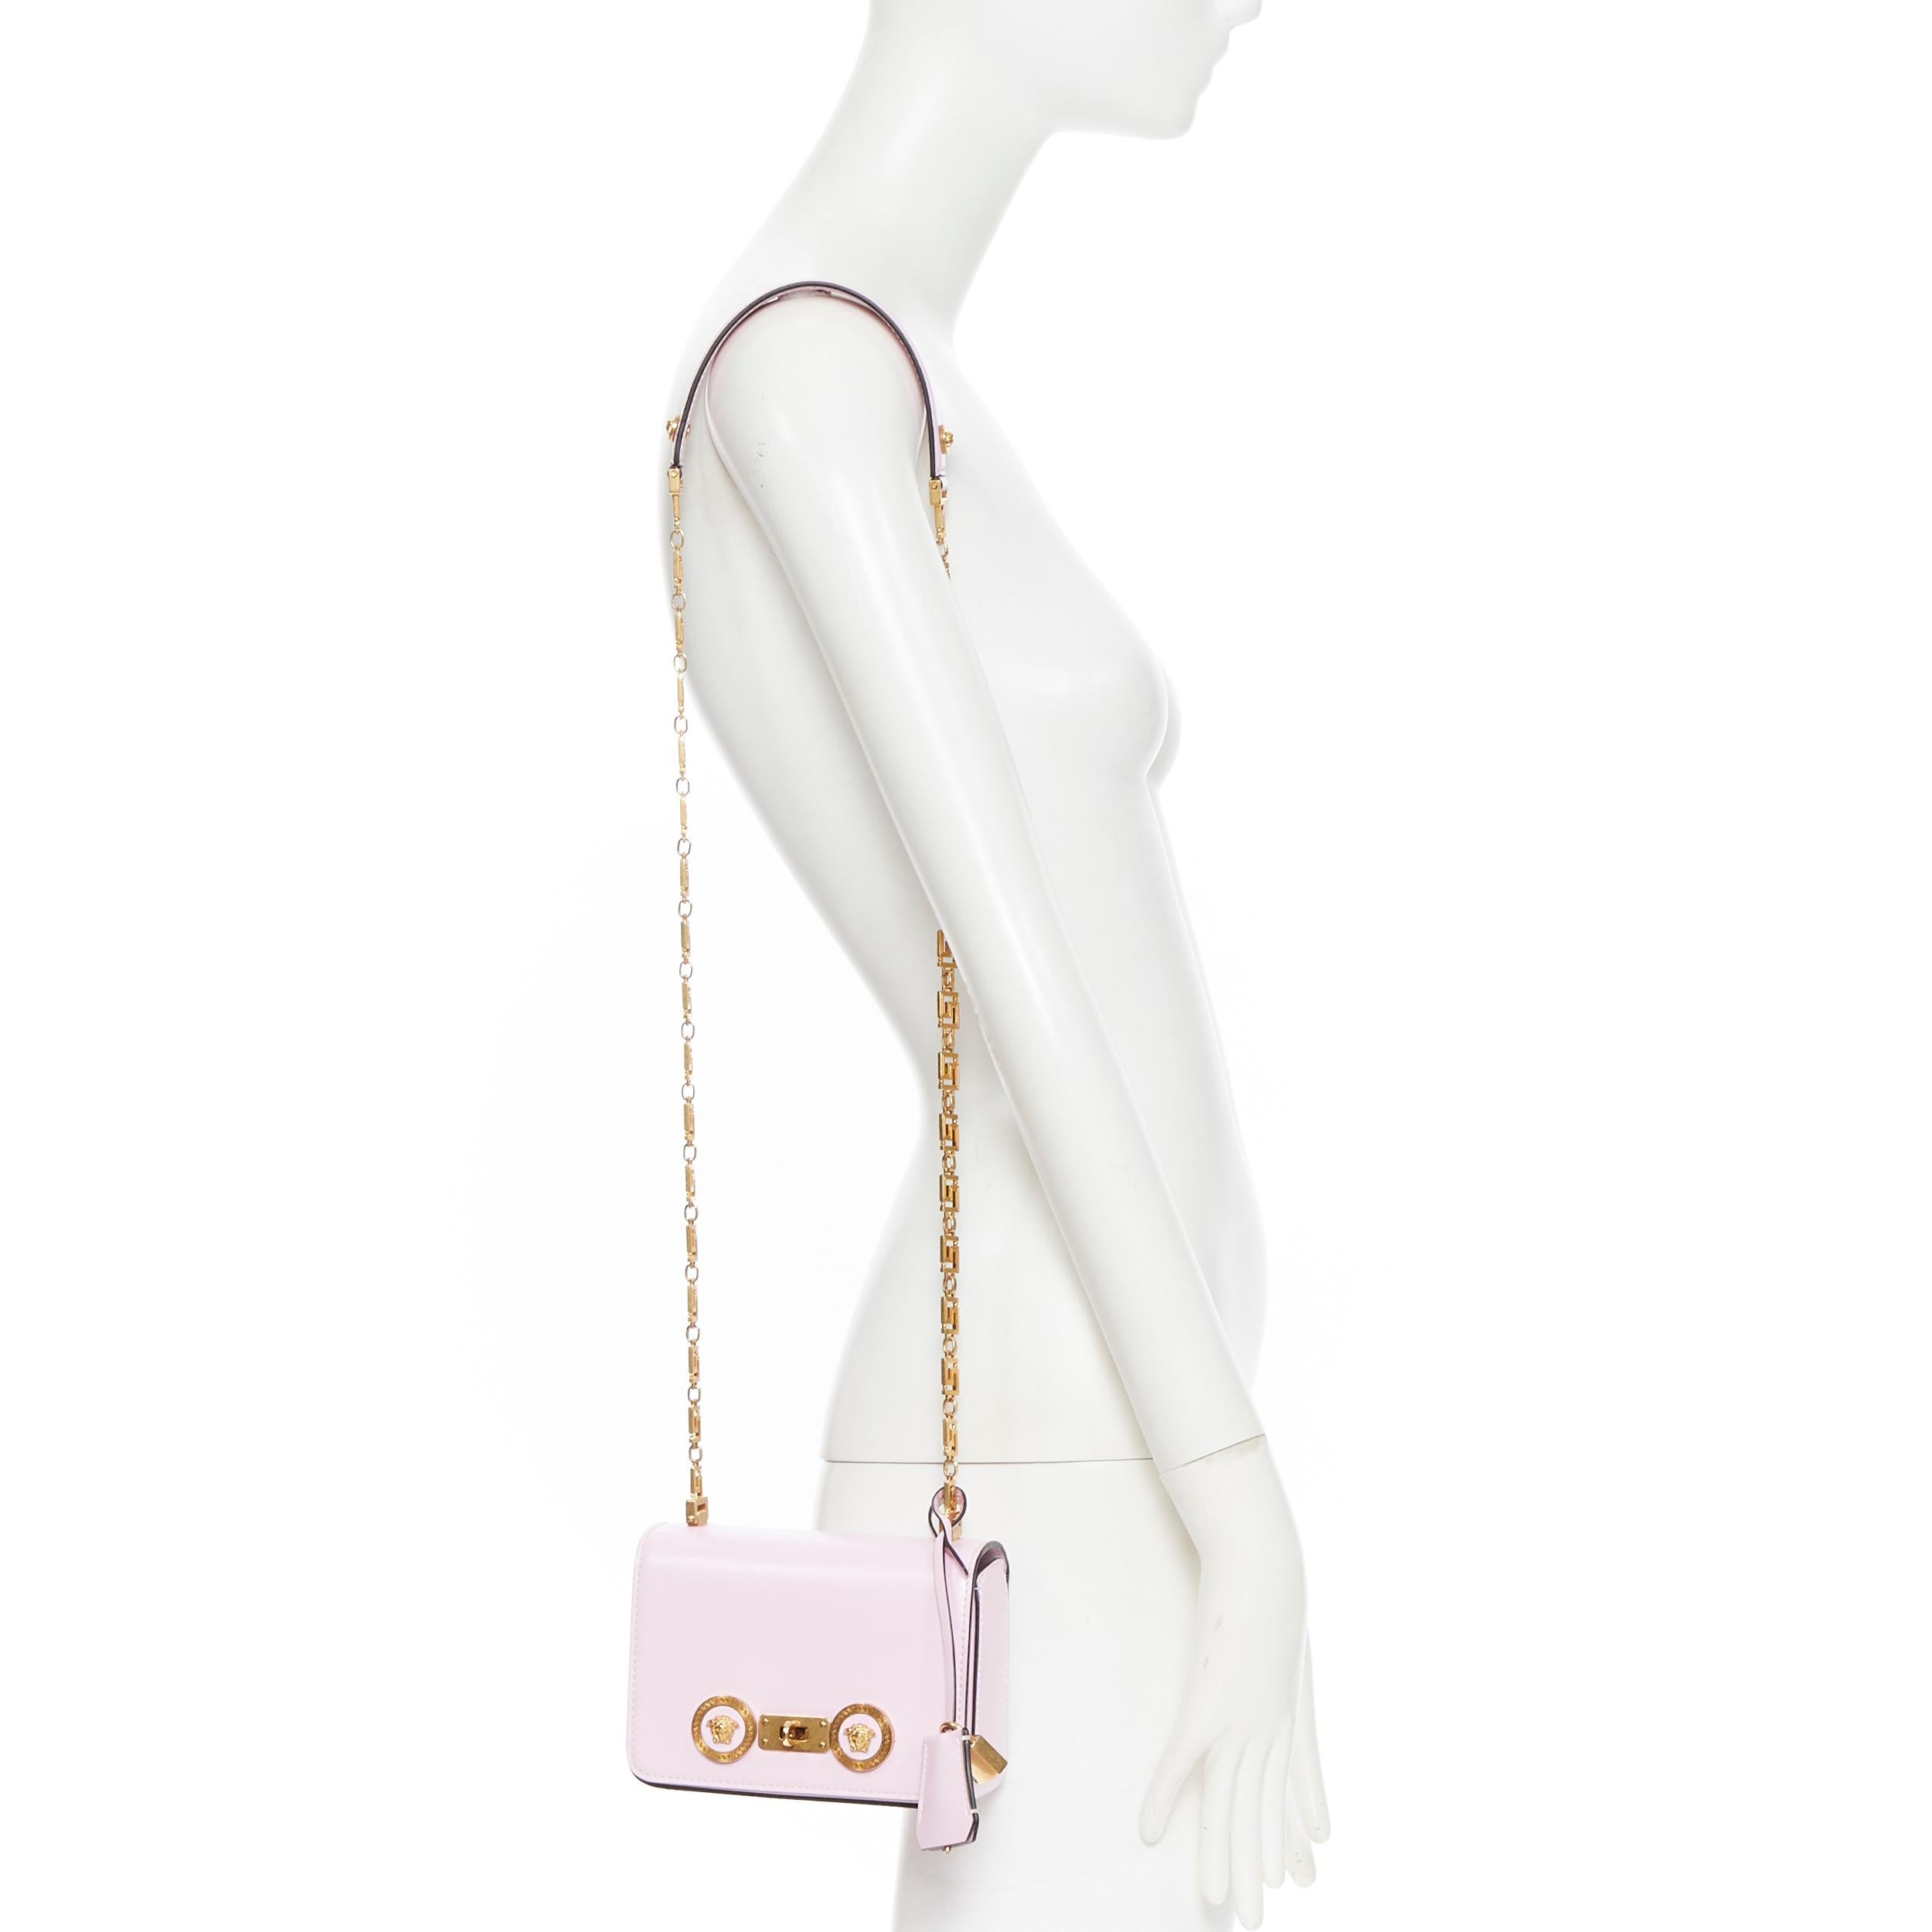 new VERSACE Mini Icon light pink dual Medusa turnlock greca chain shoulder bag
Brand: Versace
Designer: Donatella Versace
Collection: 2019
Model Name / Style: Mini Icon
Material: Leather
Color: Pink
Pattern: Solid
Closure: Turnlock
Lining material: